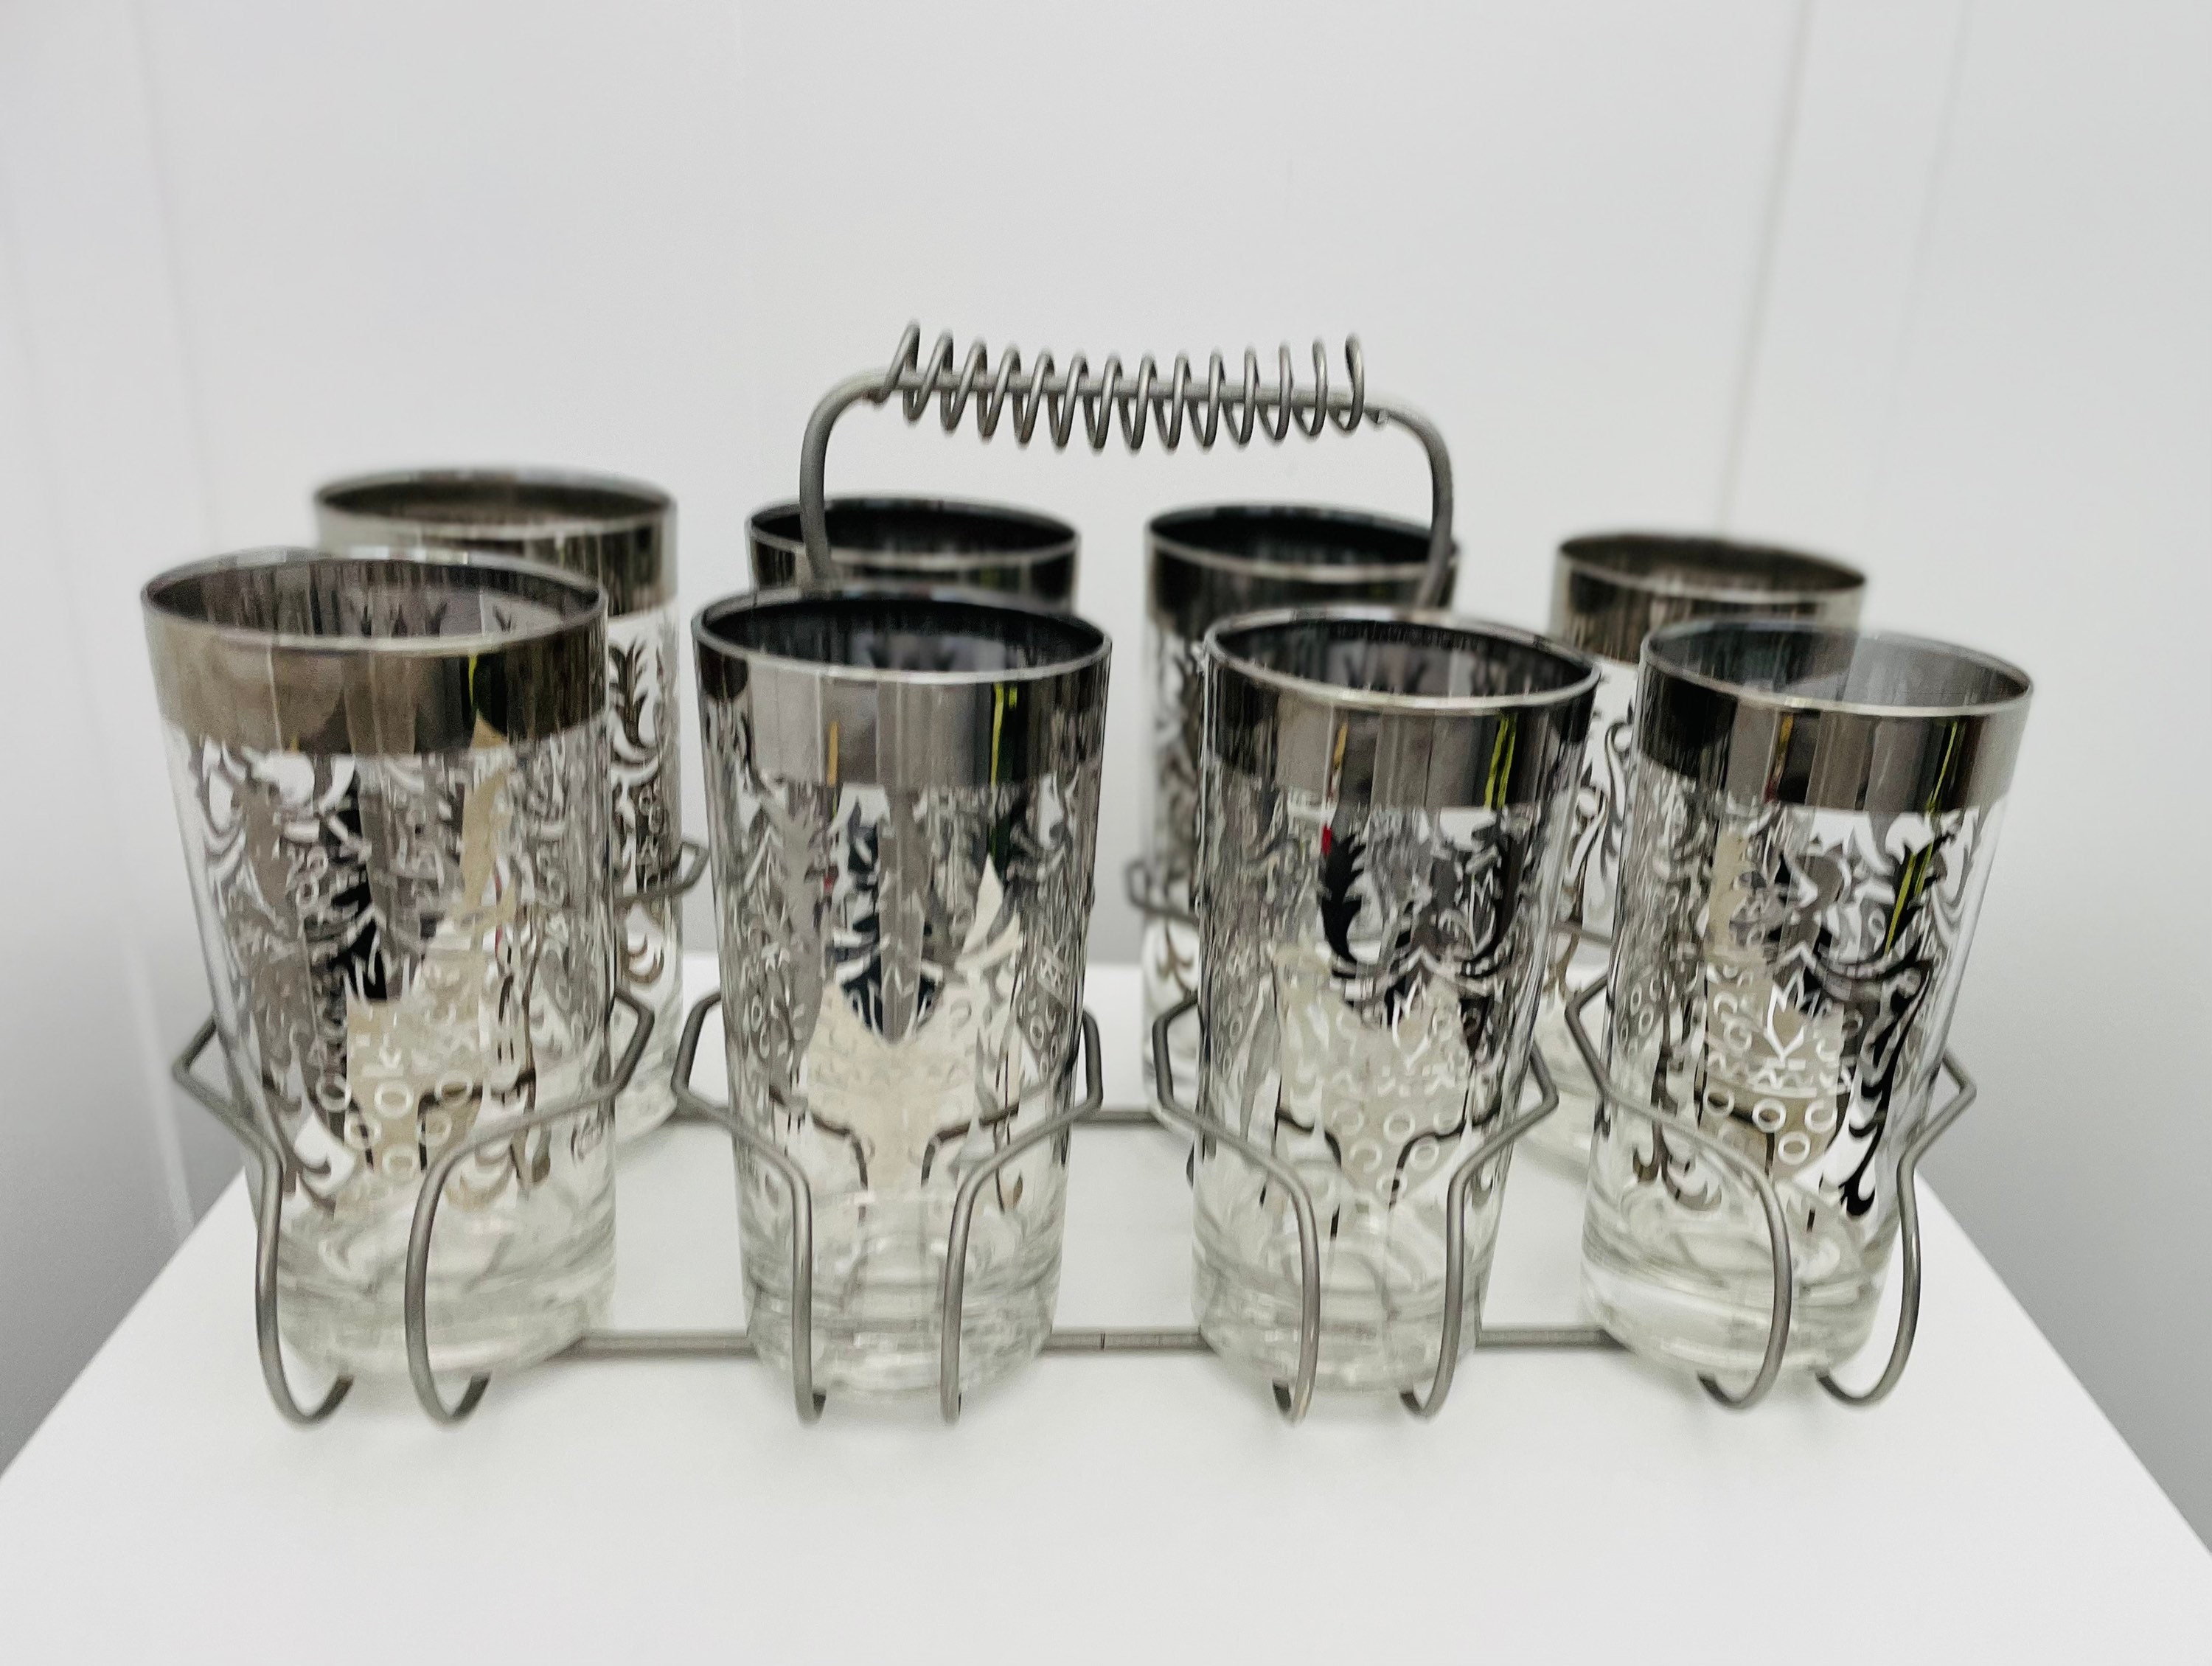 Vintage Kimiko Signed Silver High Ball Glasses Set of 8 with